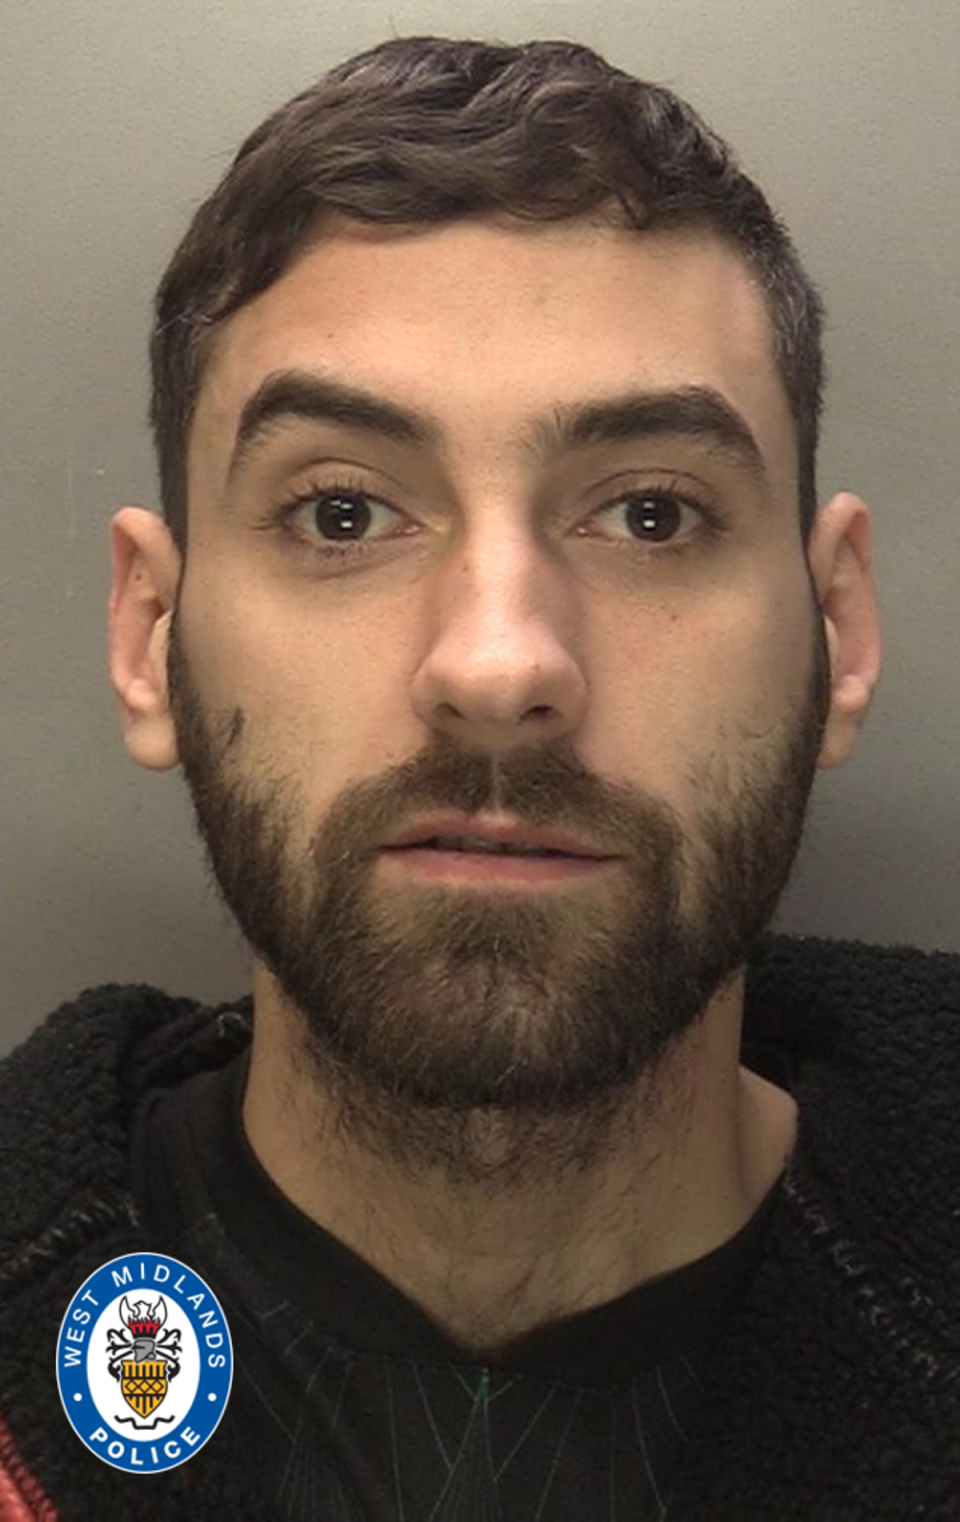 Thomas Freeman has been jailed for 12 months after pleading guilty to careless driving (West Midlands Police)